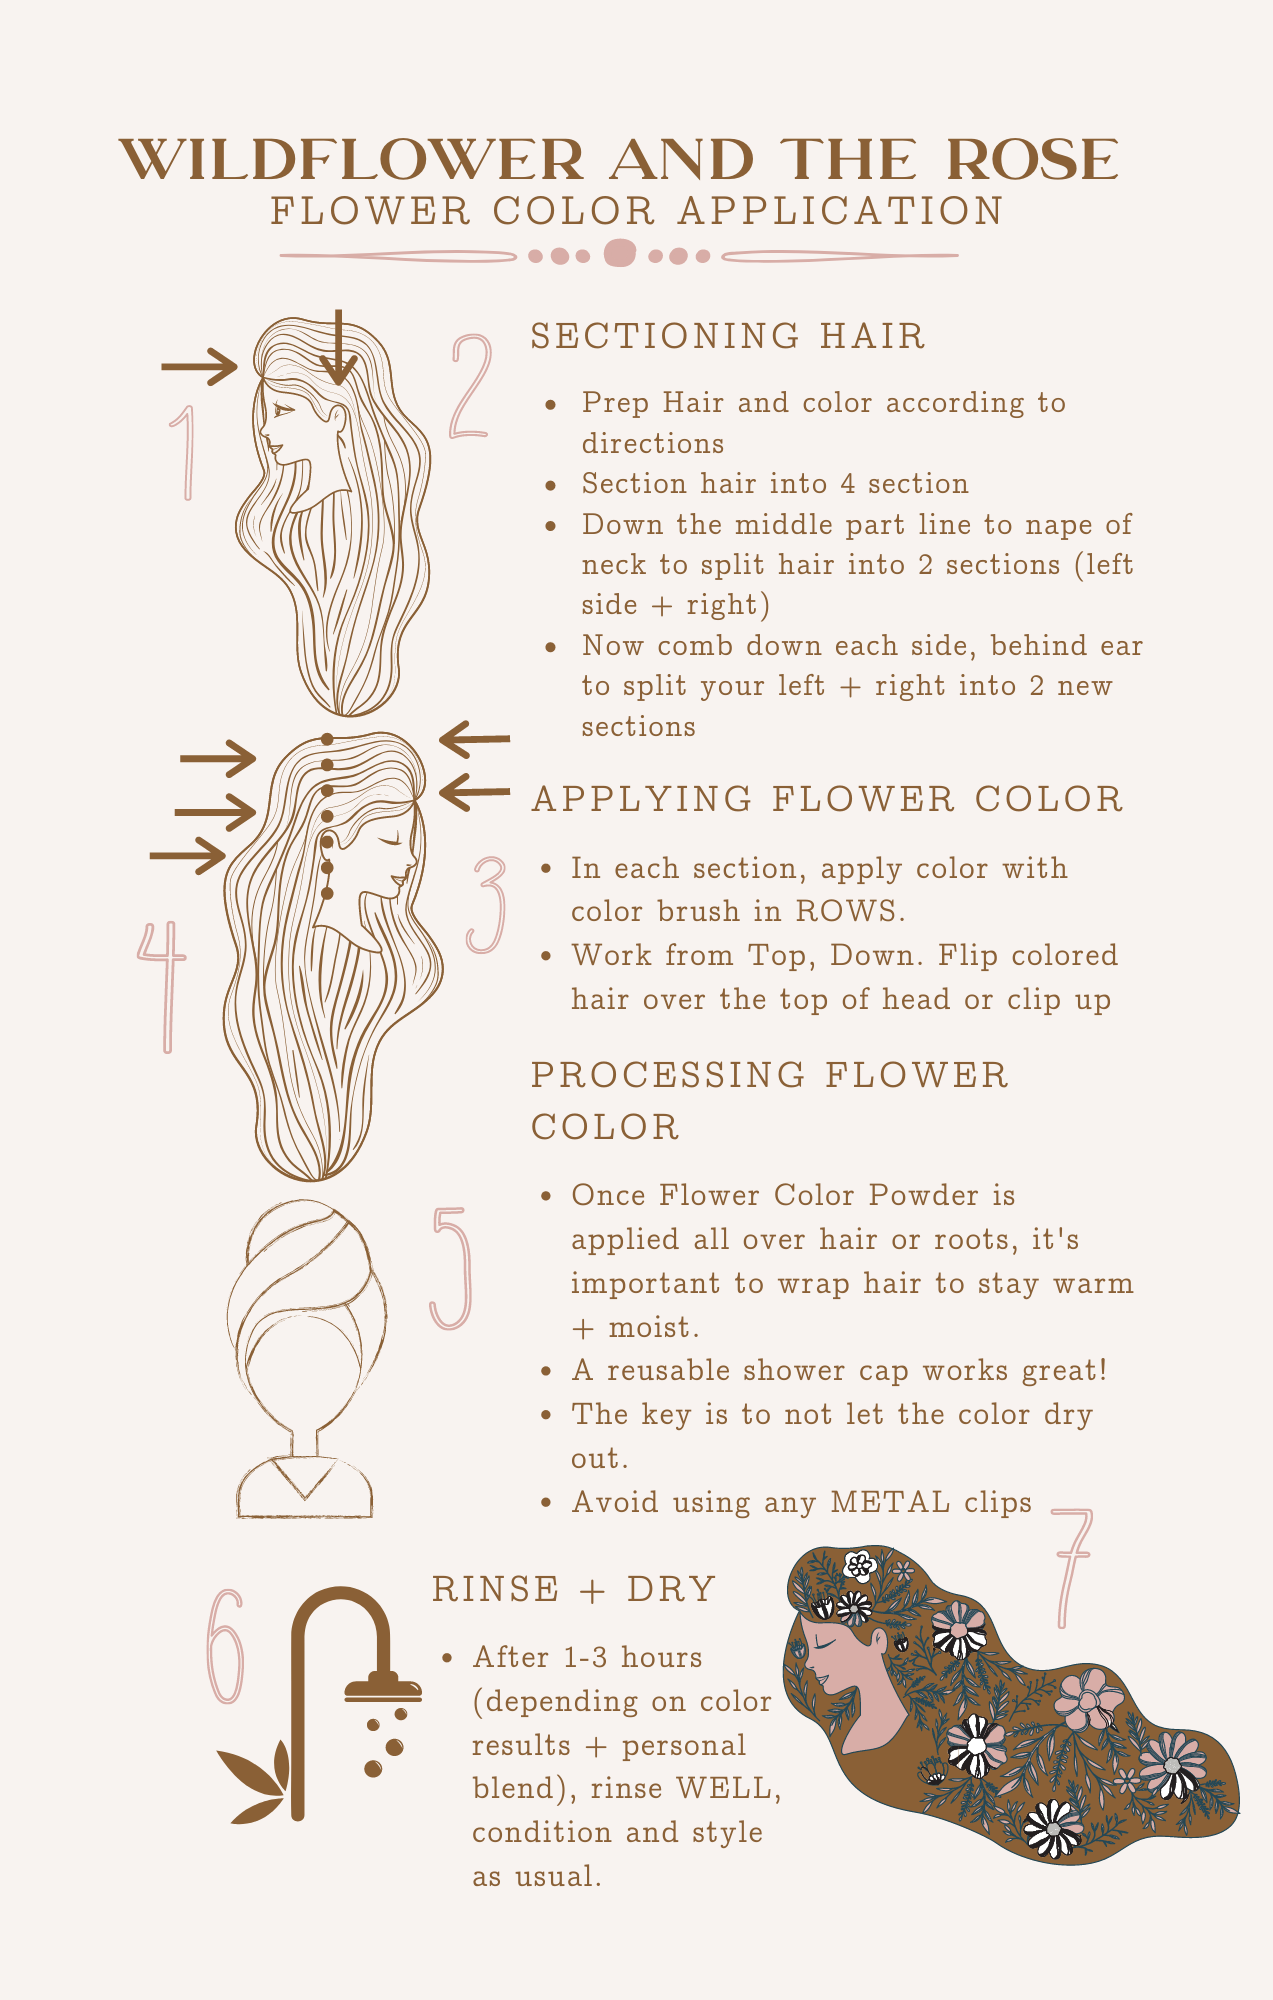 Application of Flower Hair Color Powder